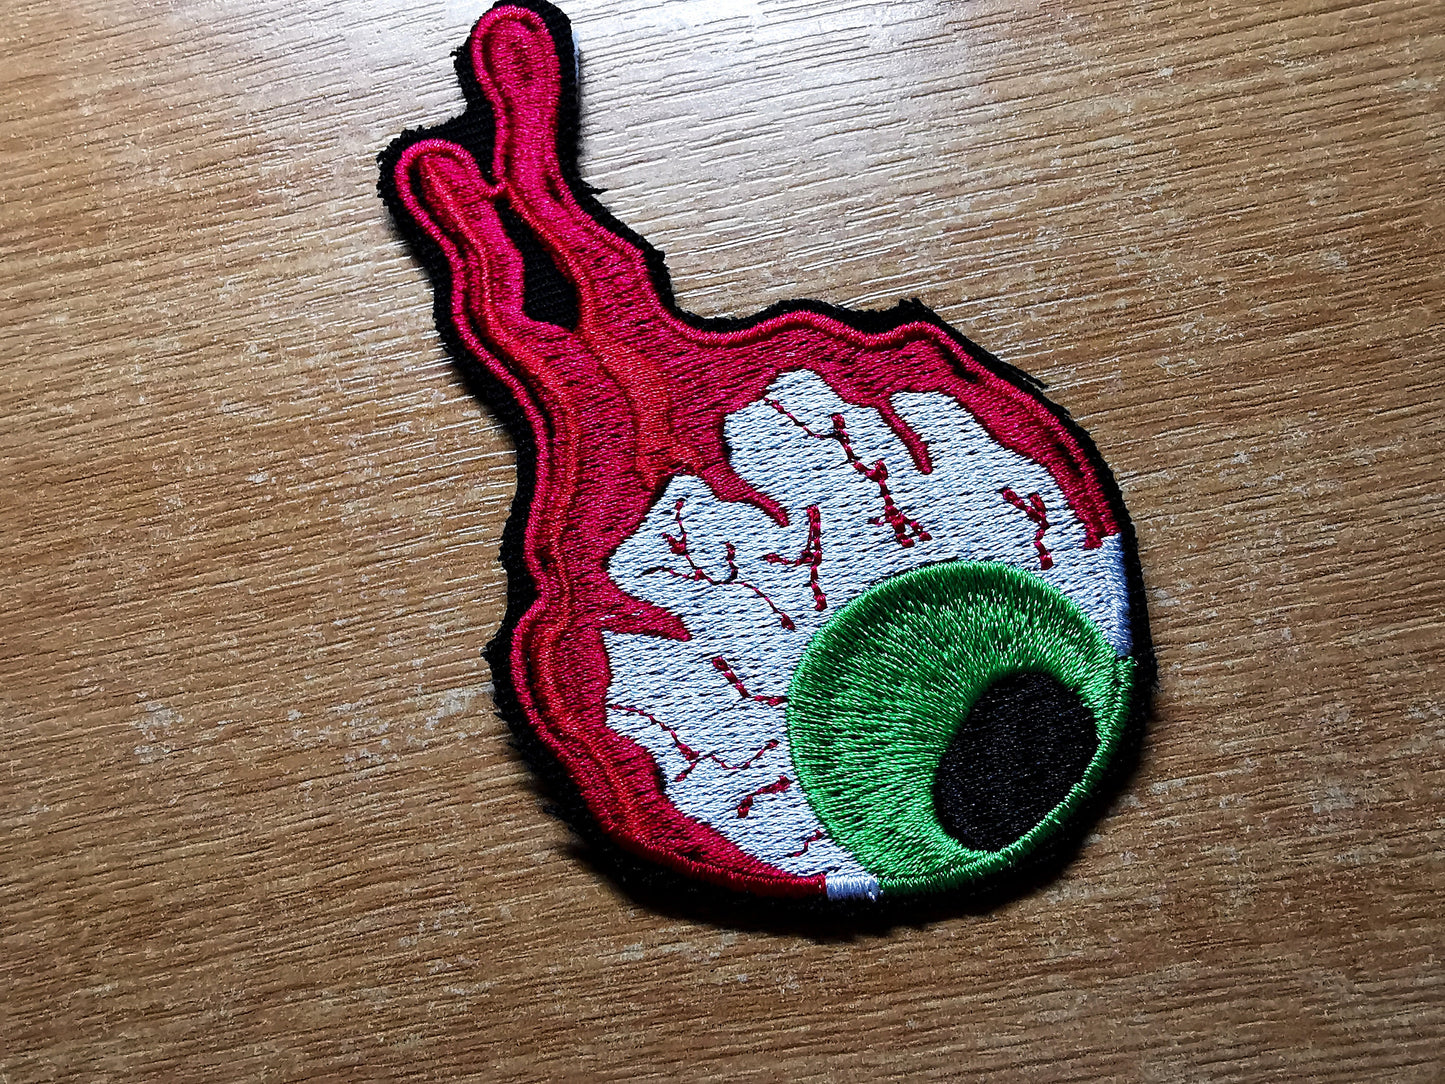 Creepy Eyeball Larger Iron on Patch Embroidered Art Skateboarding Style Graphics